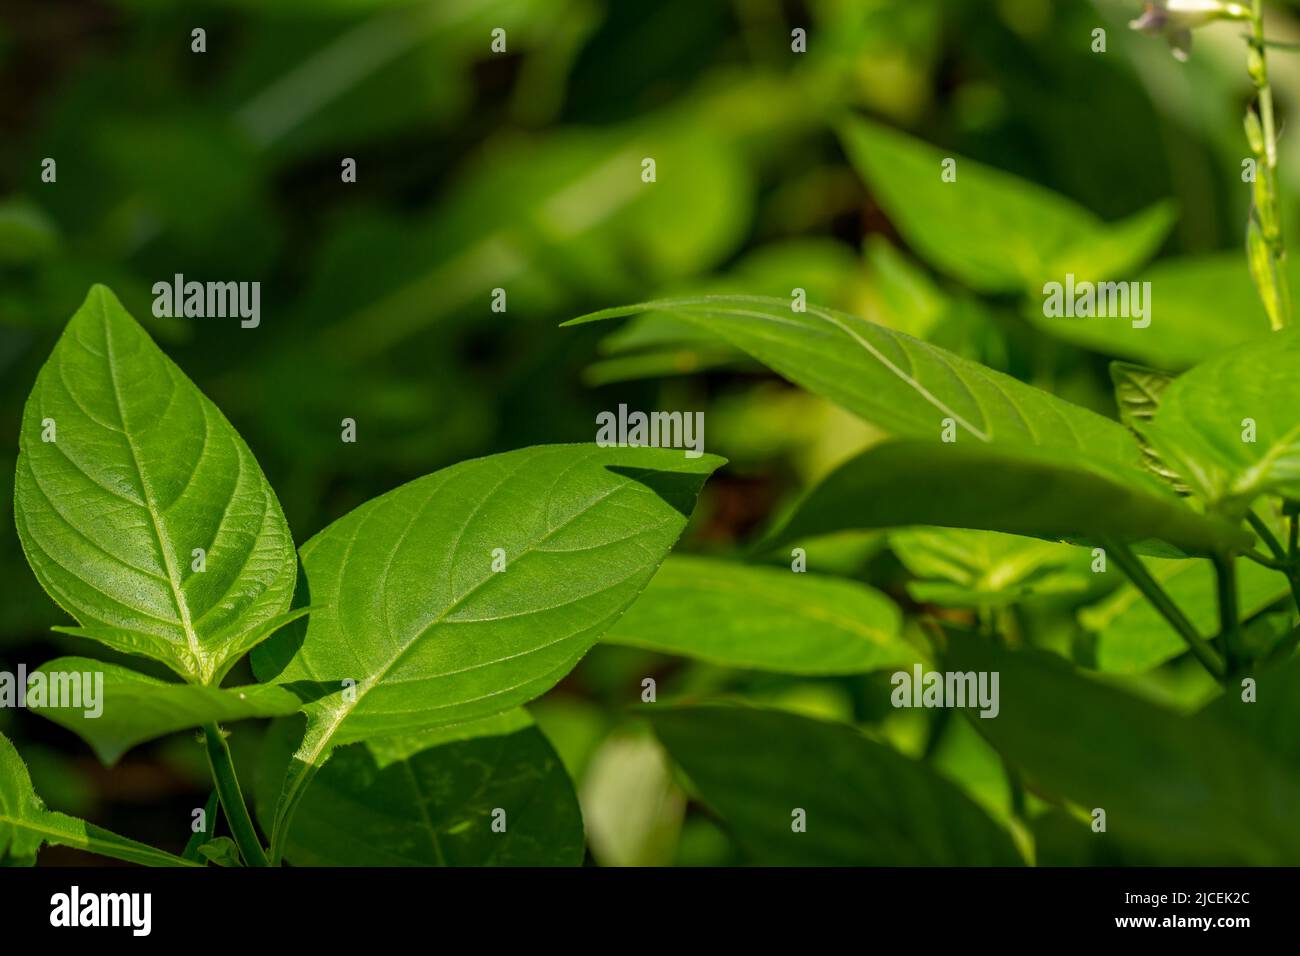 Green grass called chinese violet, leaves and stems are green, nature theme Stock Photo